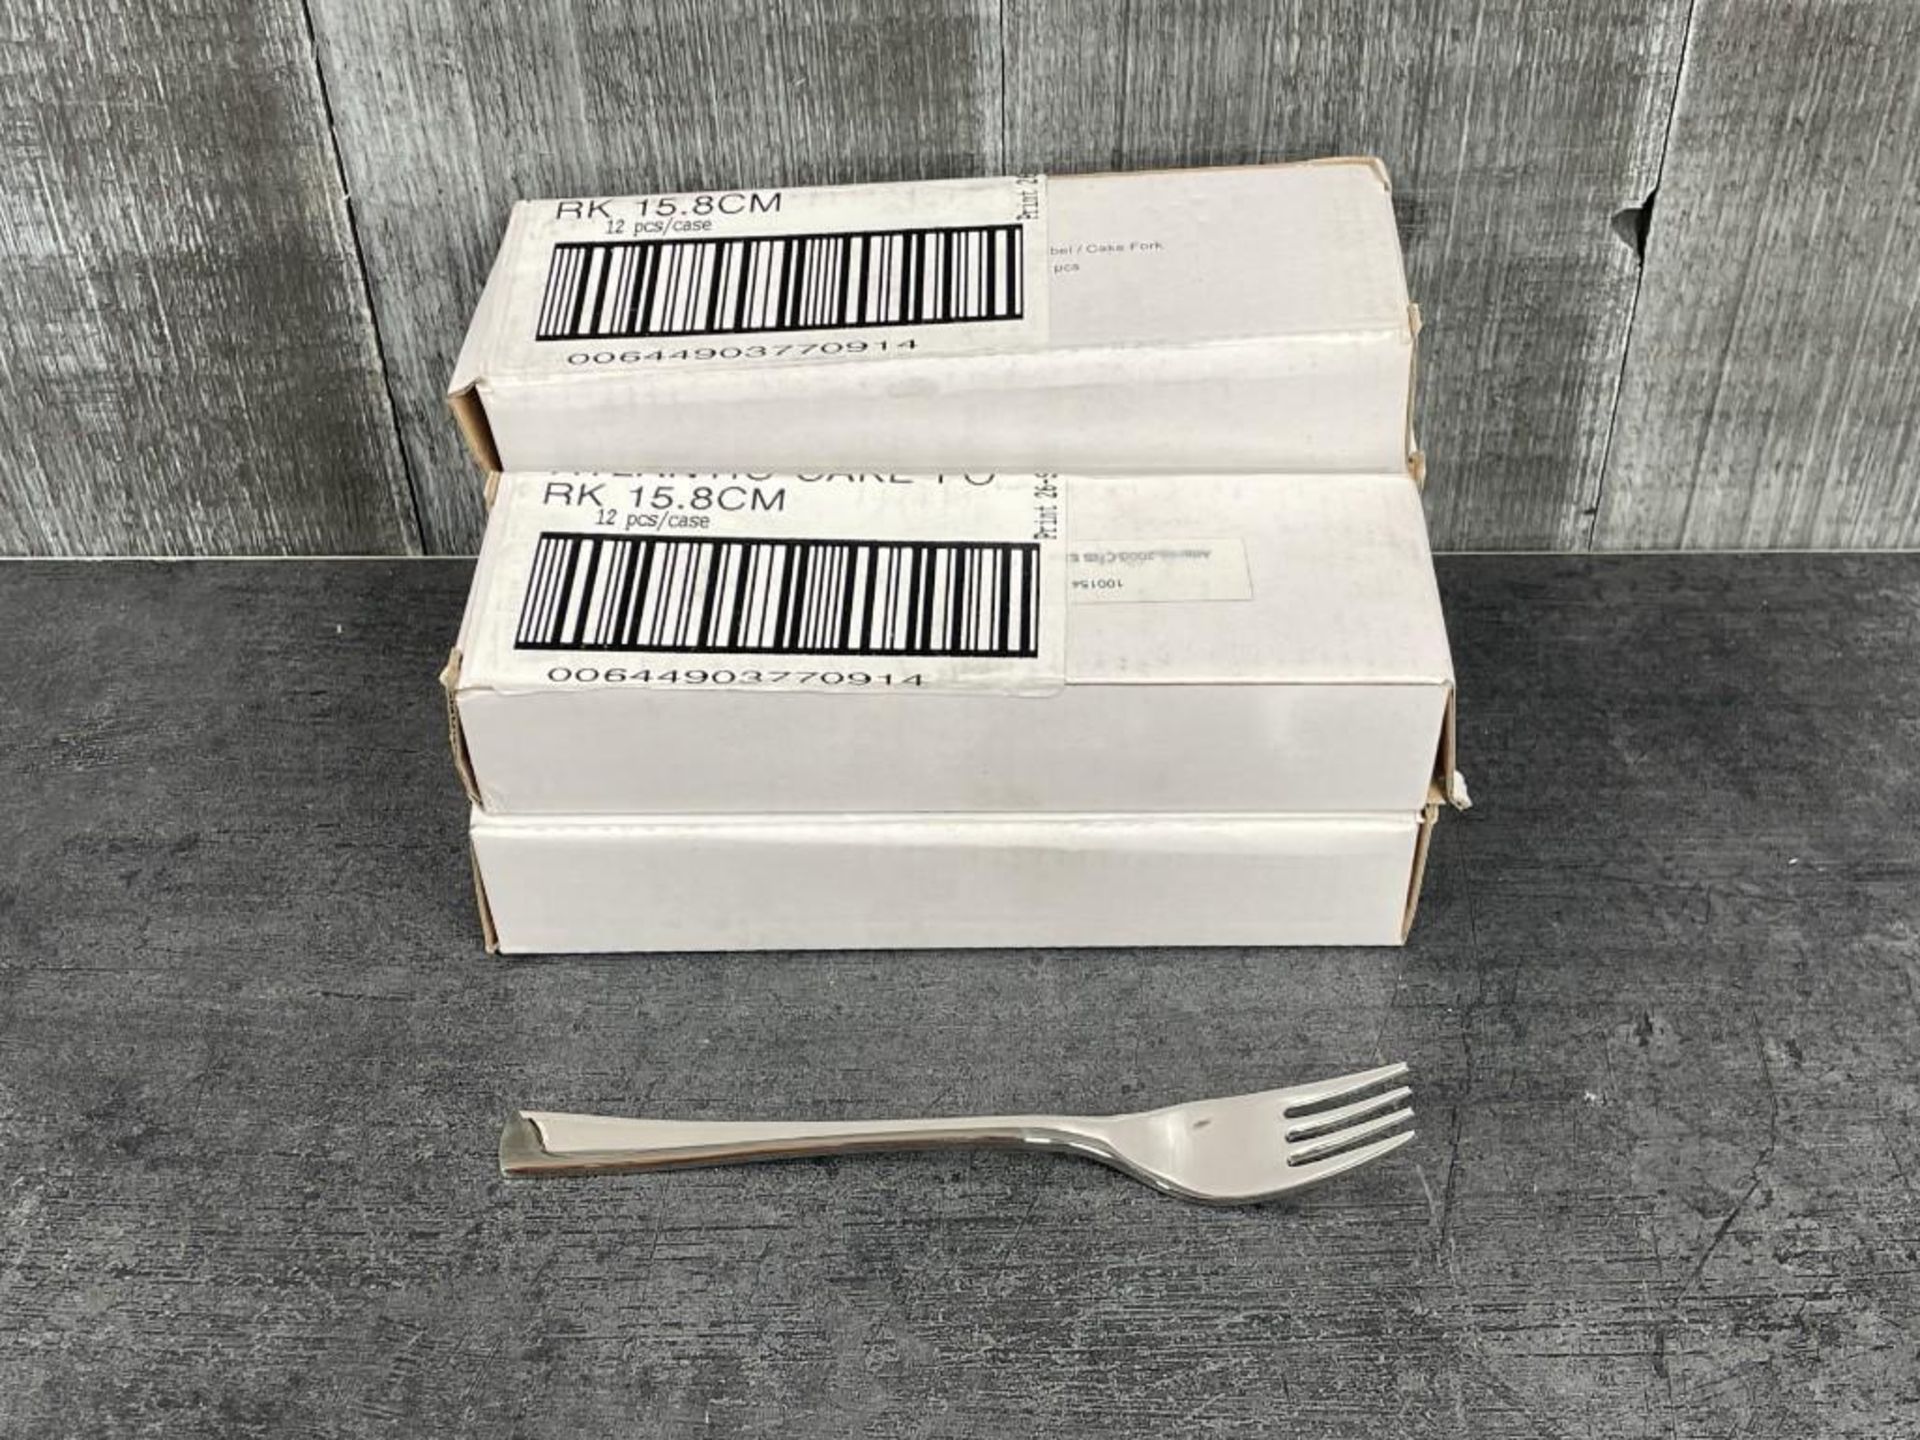 ATLANTIC HEAVY WEIGHT CAKE FORKS, SOLA MB223 - LOT OF 60 (5 BOXES)